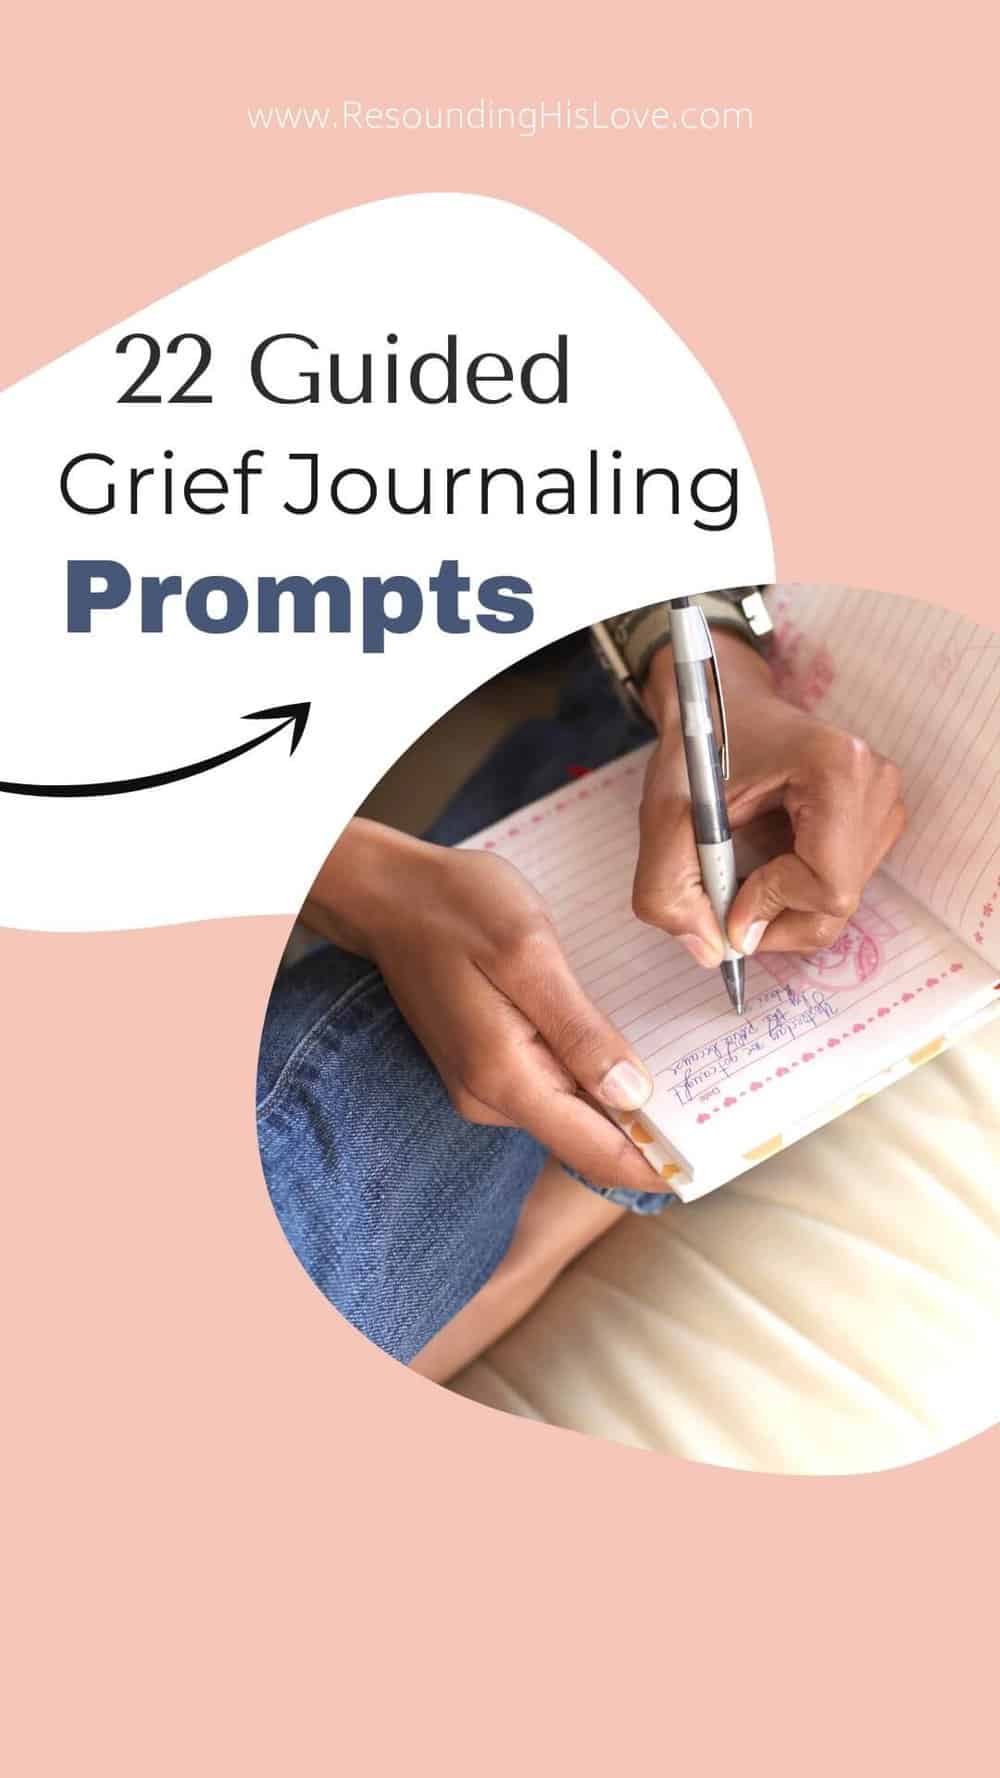 a woman sitting cross legged writing in a journal with text 22 Guided Grief Journaling Prompts